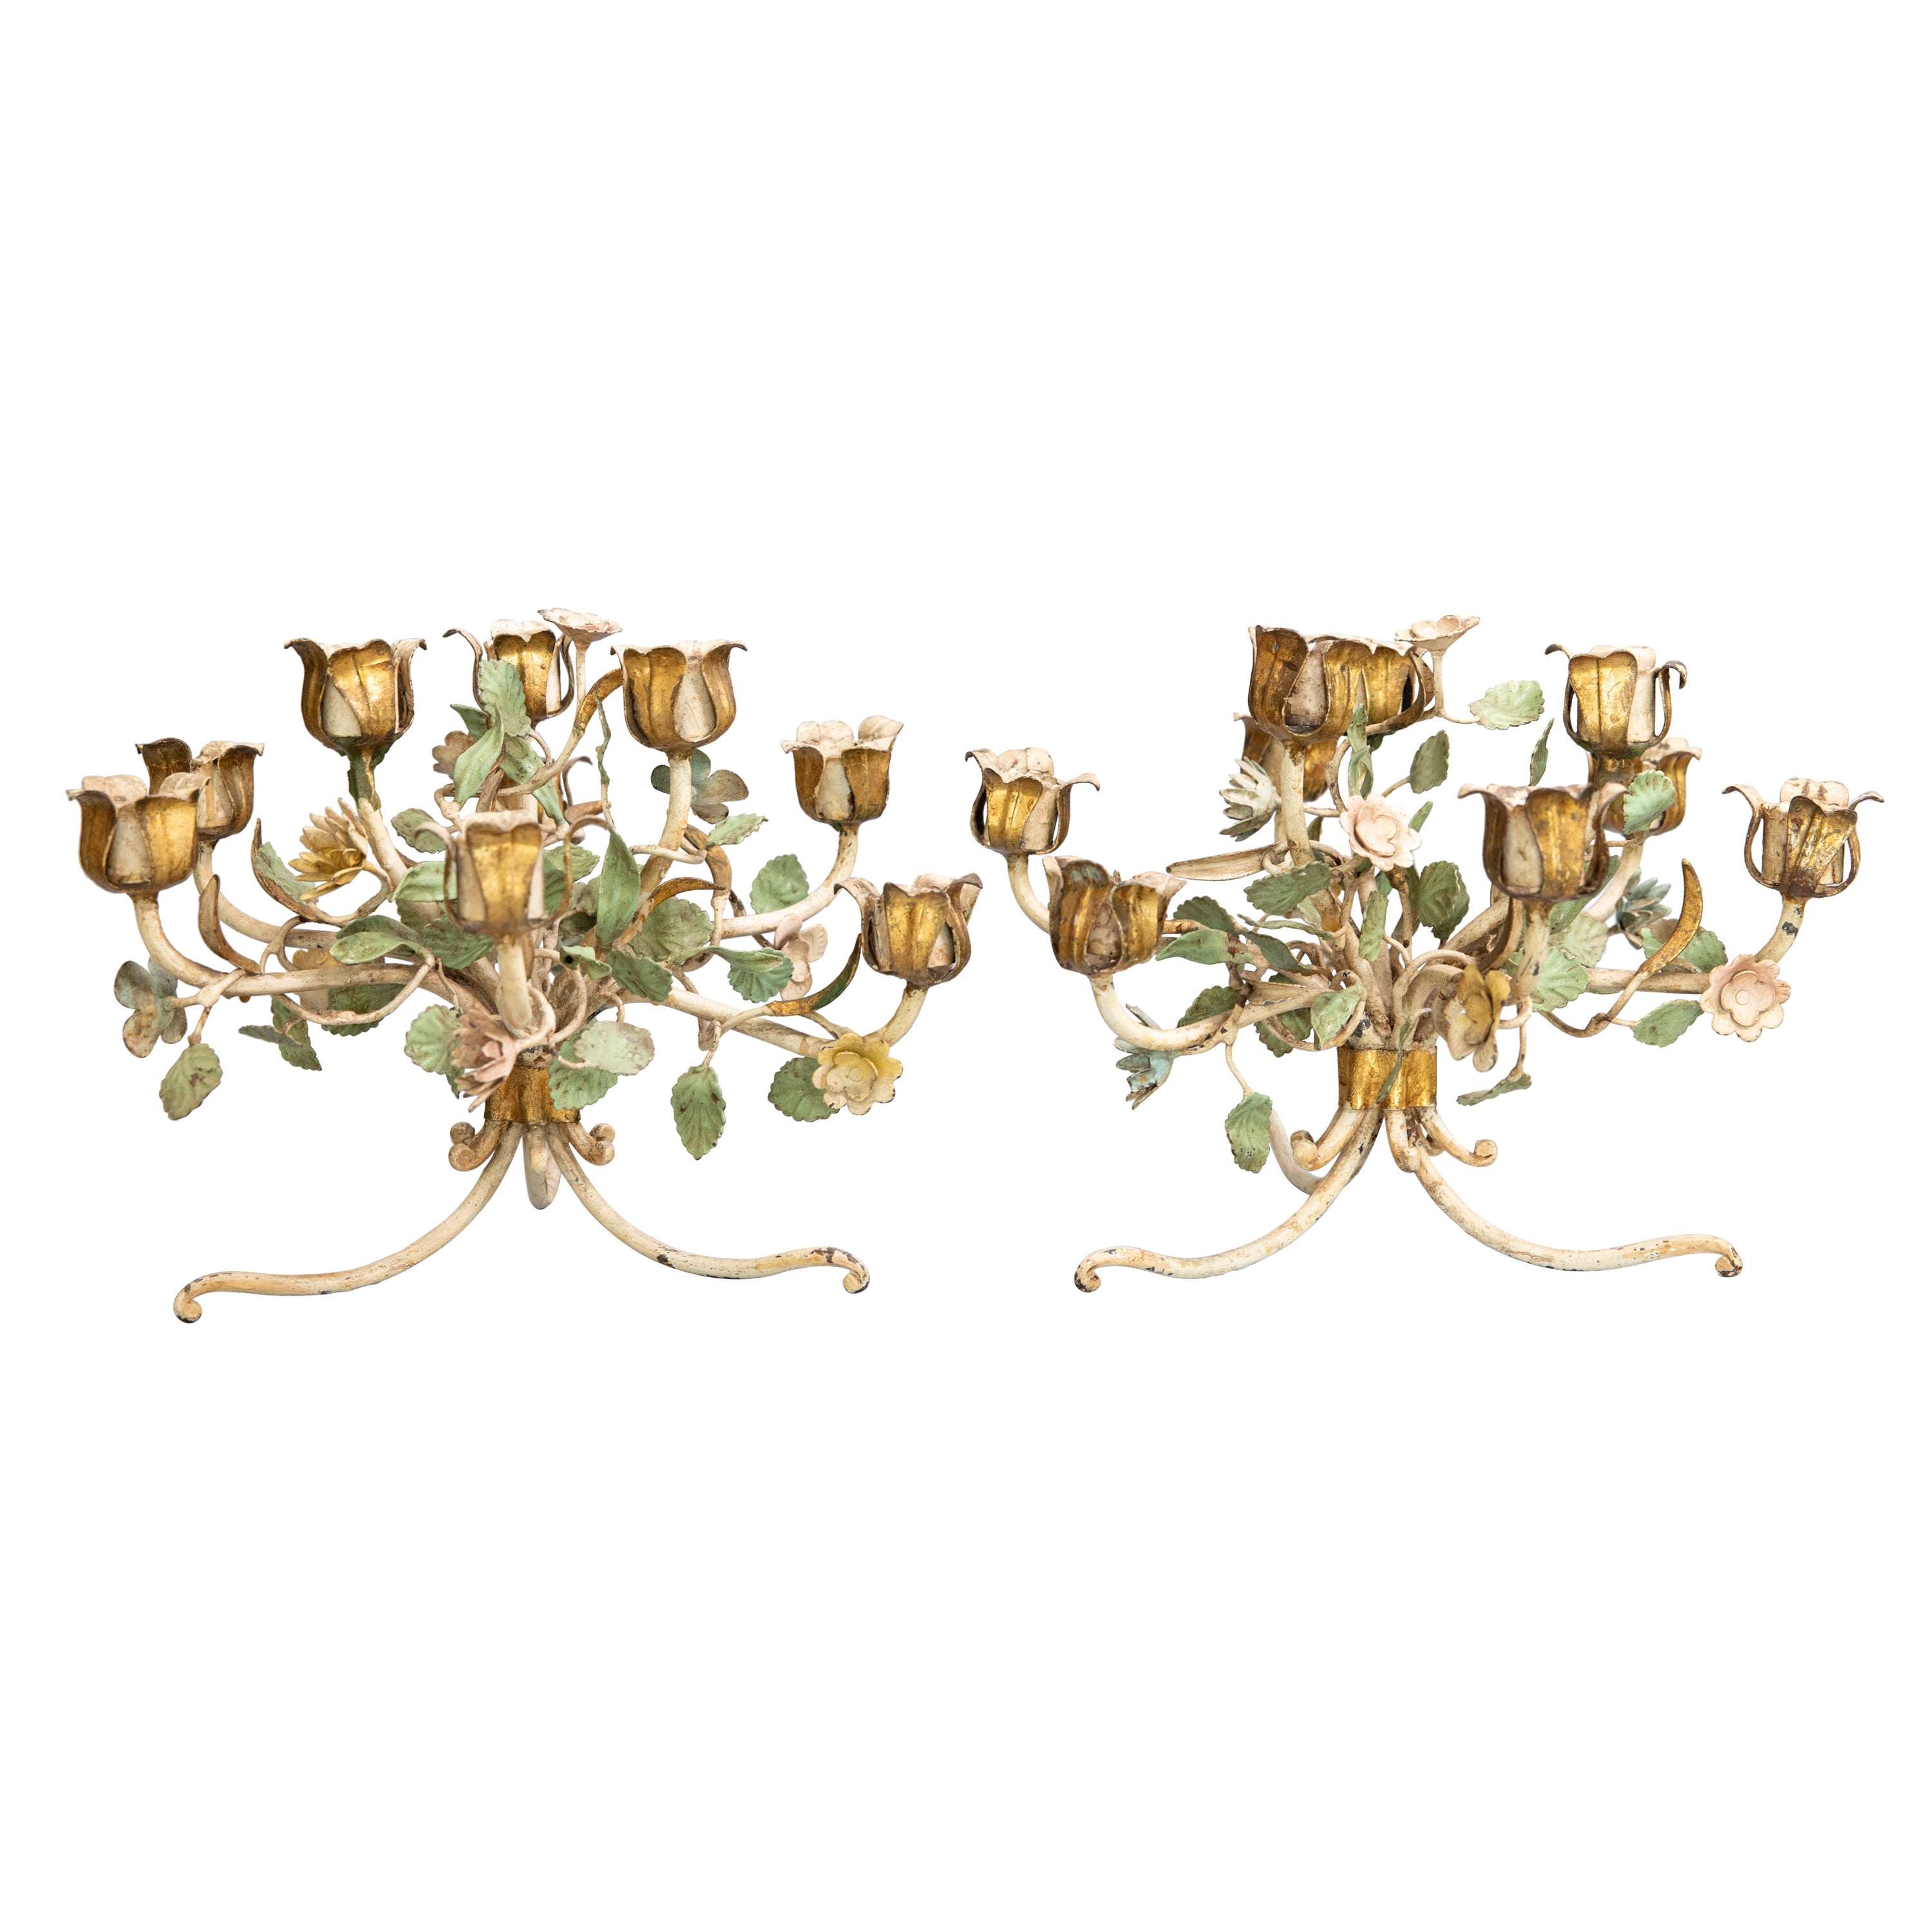 Pair of Italian Tole Floral Wildflowers Candelabras Centerpieces, circa 1950 For Sale